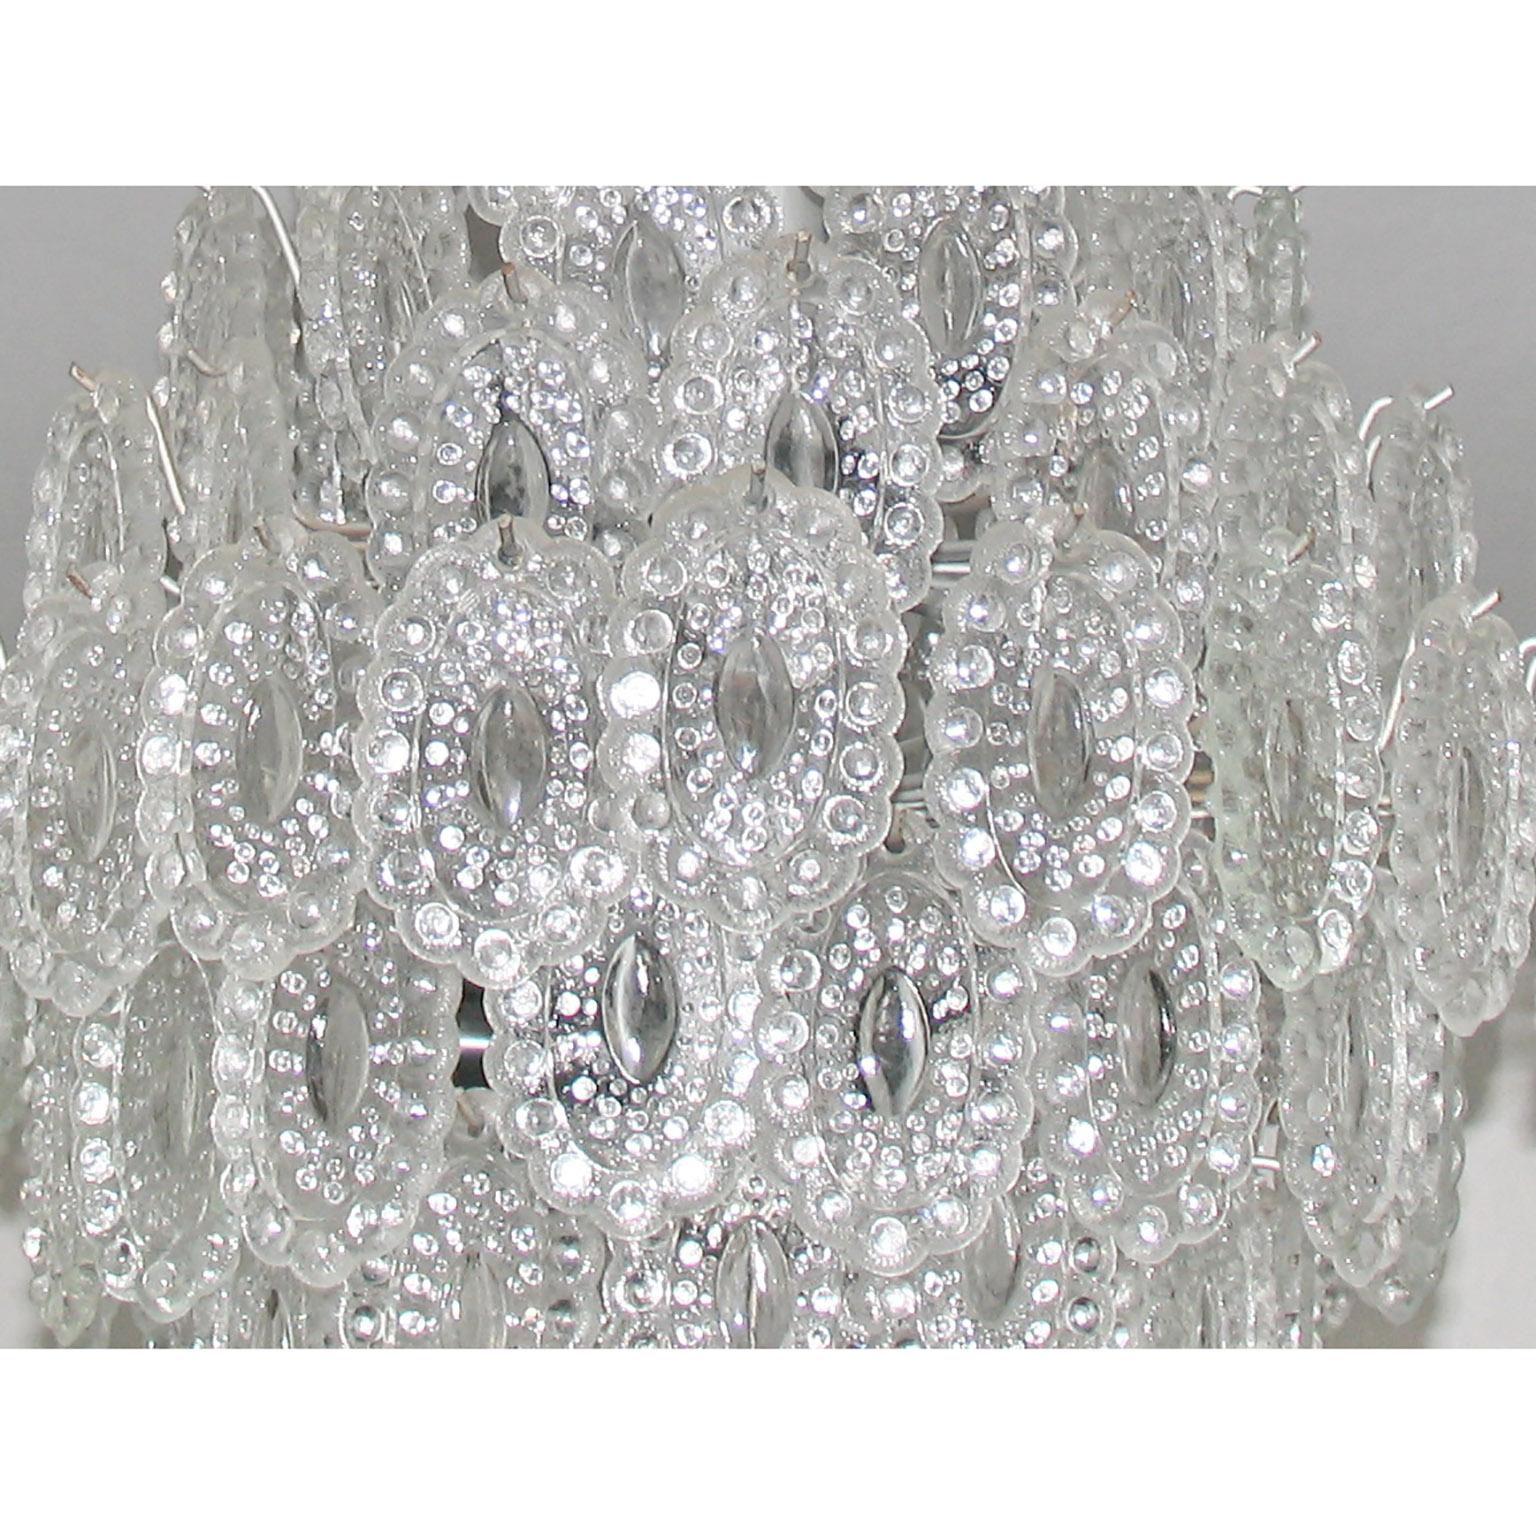 Italian Crystal Glass Chandelier in the Style of Mazzega, 1 of 2 For Sale 7